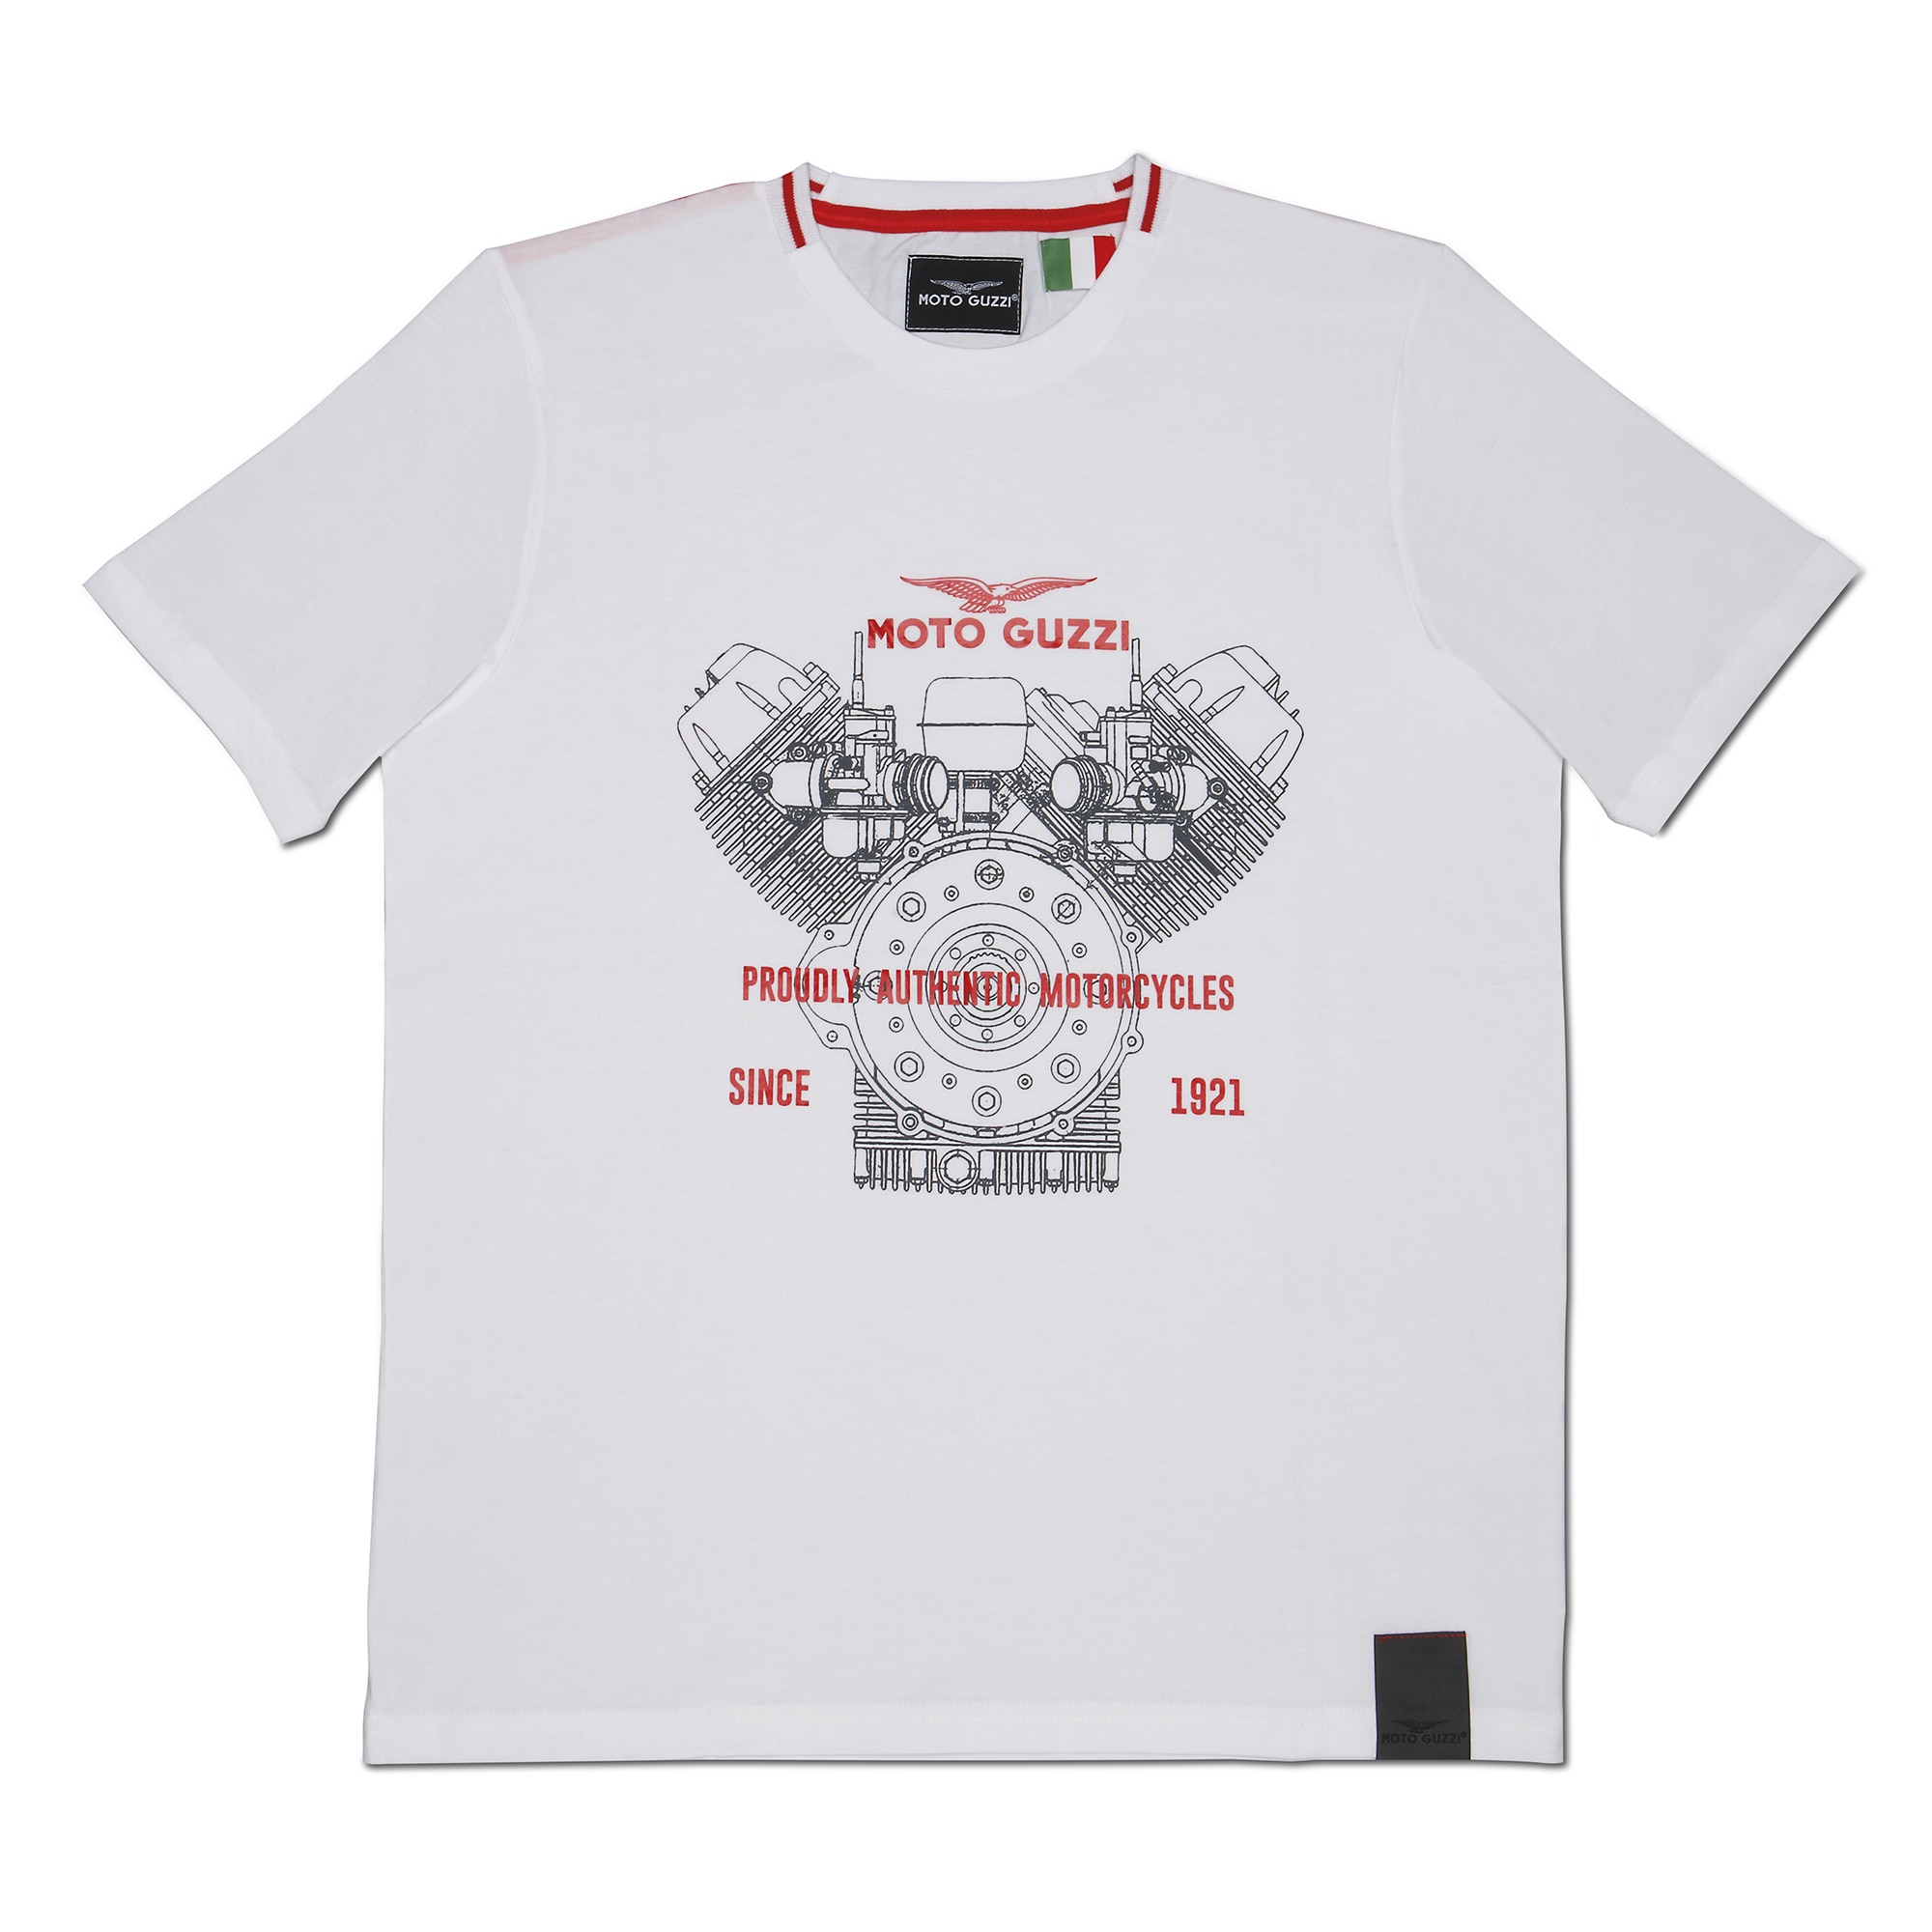 CLASSIC T-SHIRT for motorcycles 606482m | Guzzi motorcycles